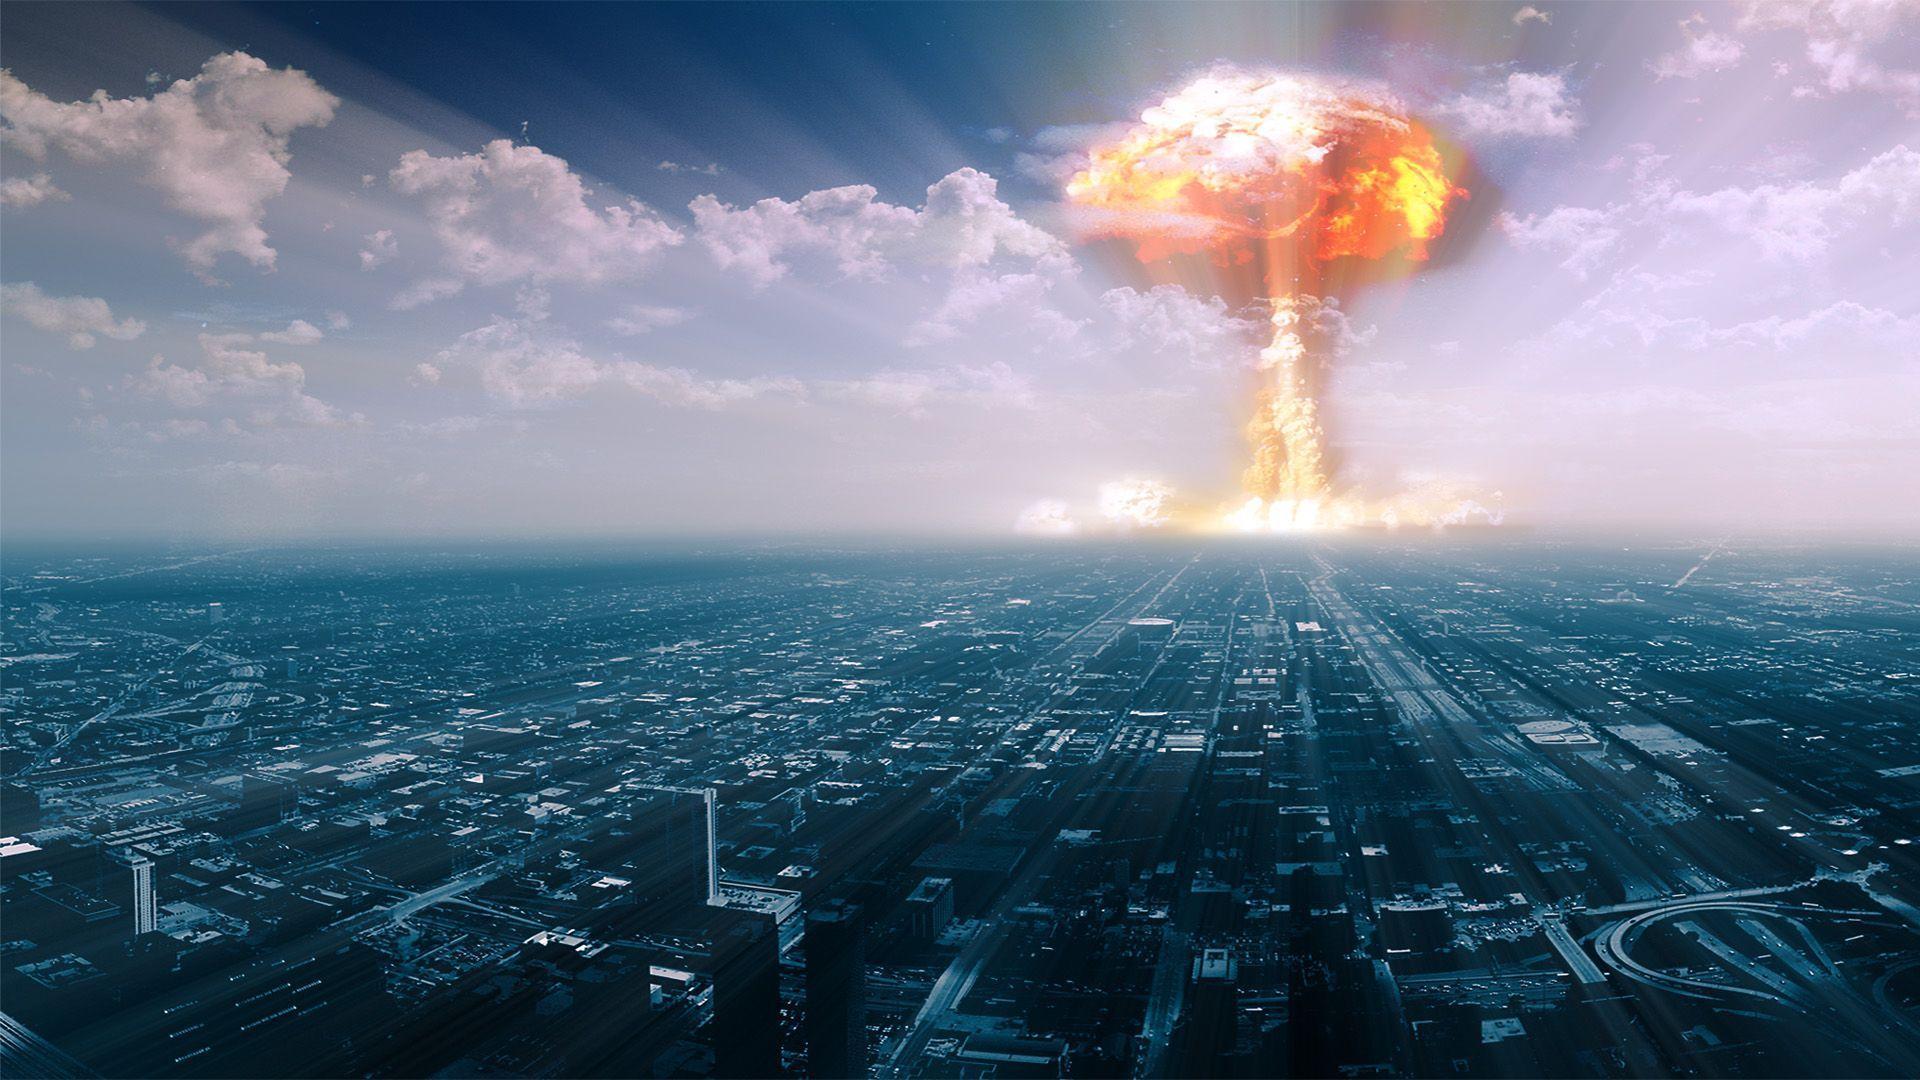 Nuclear explosion near the city Wallpaper #